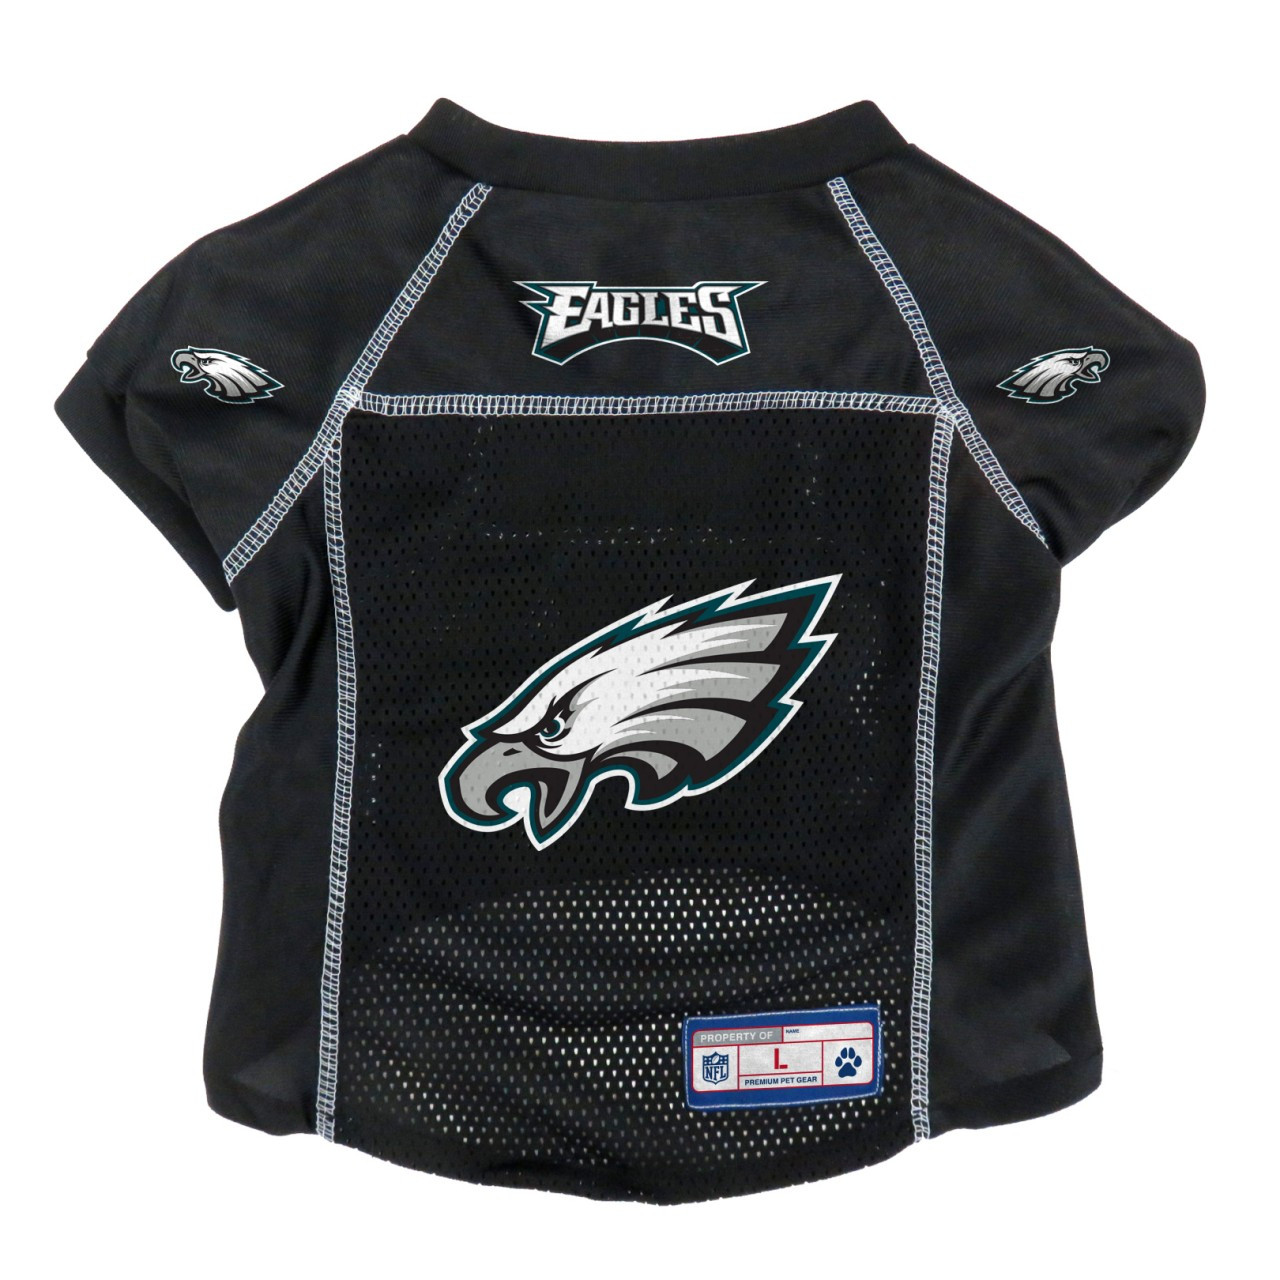 the eagles jersey